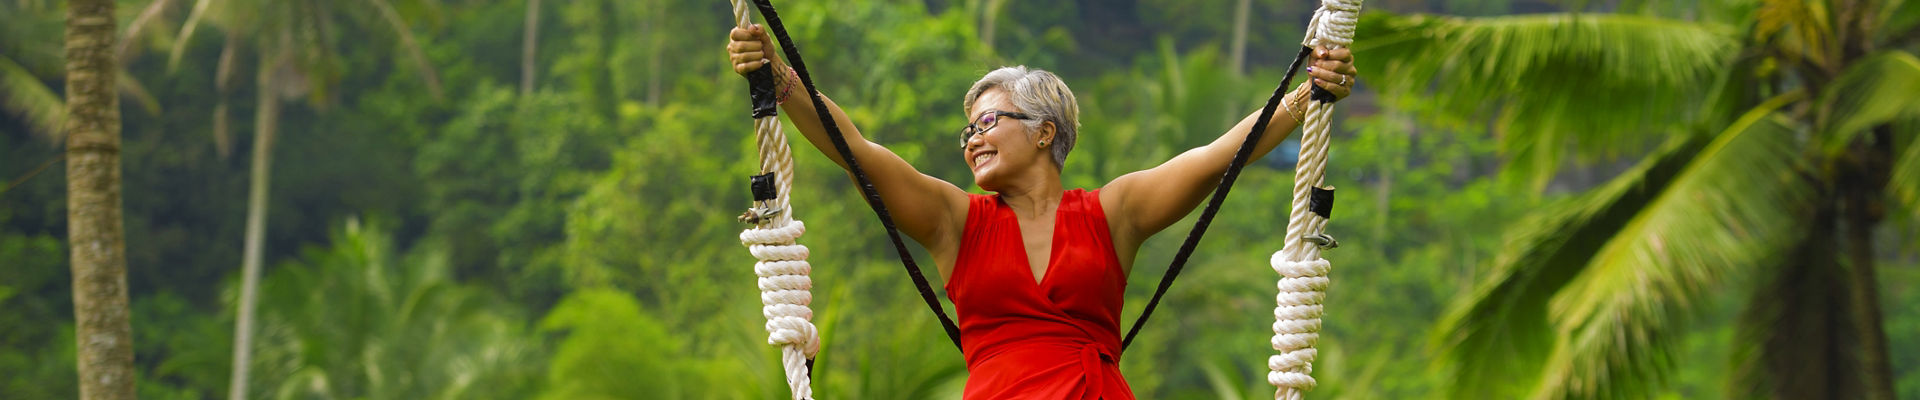 Woman riding rainforest swing in red dress